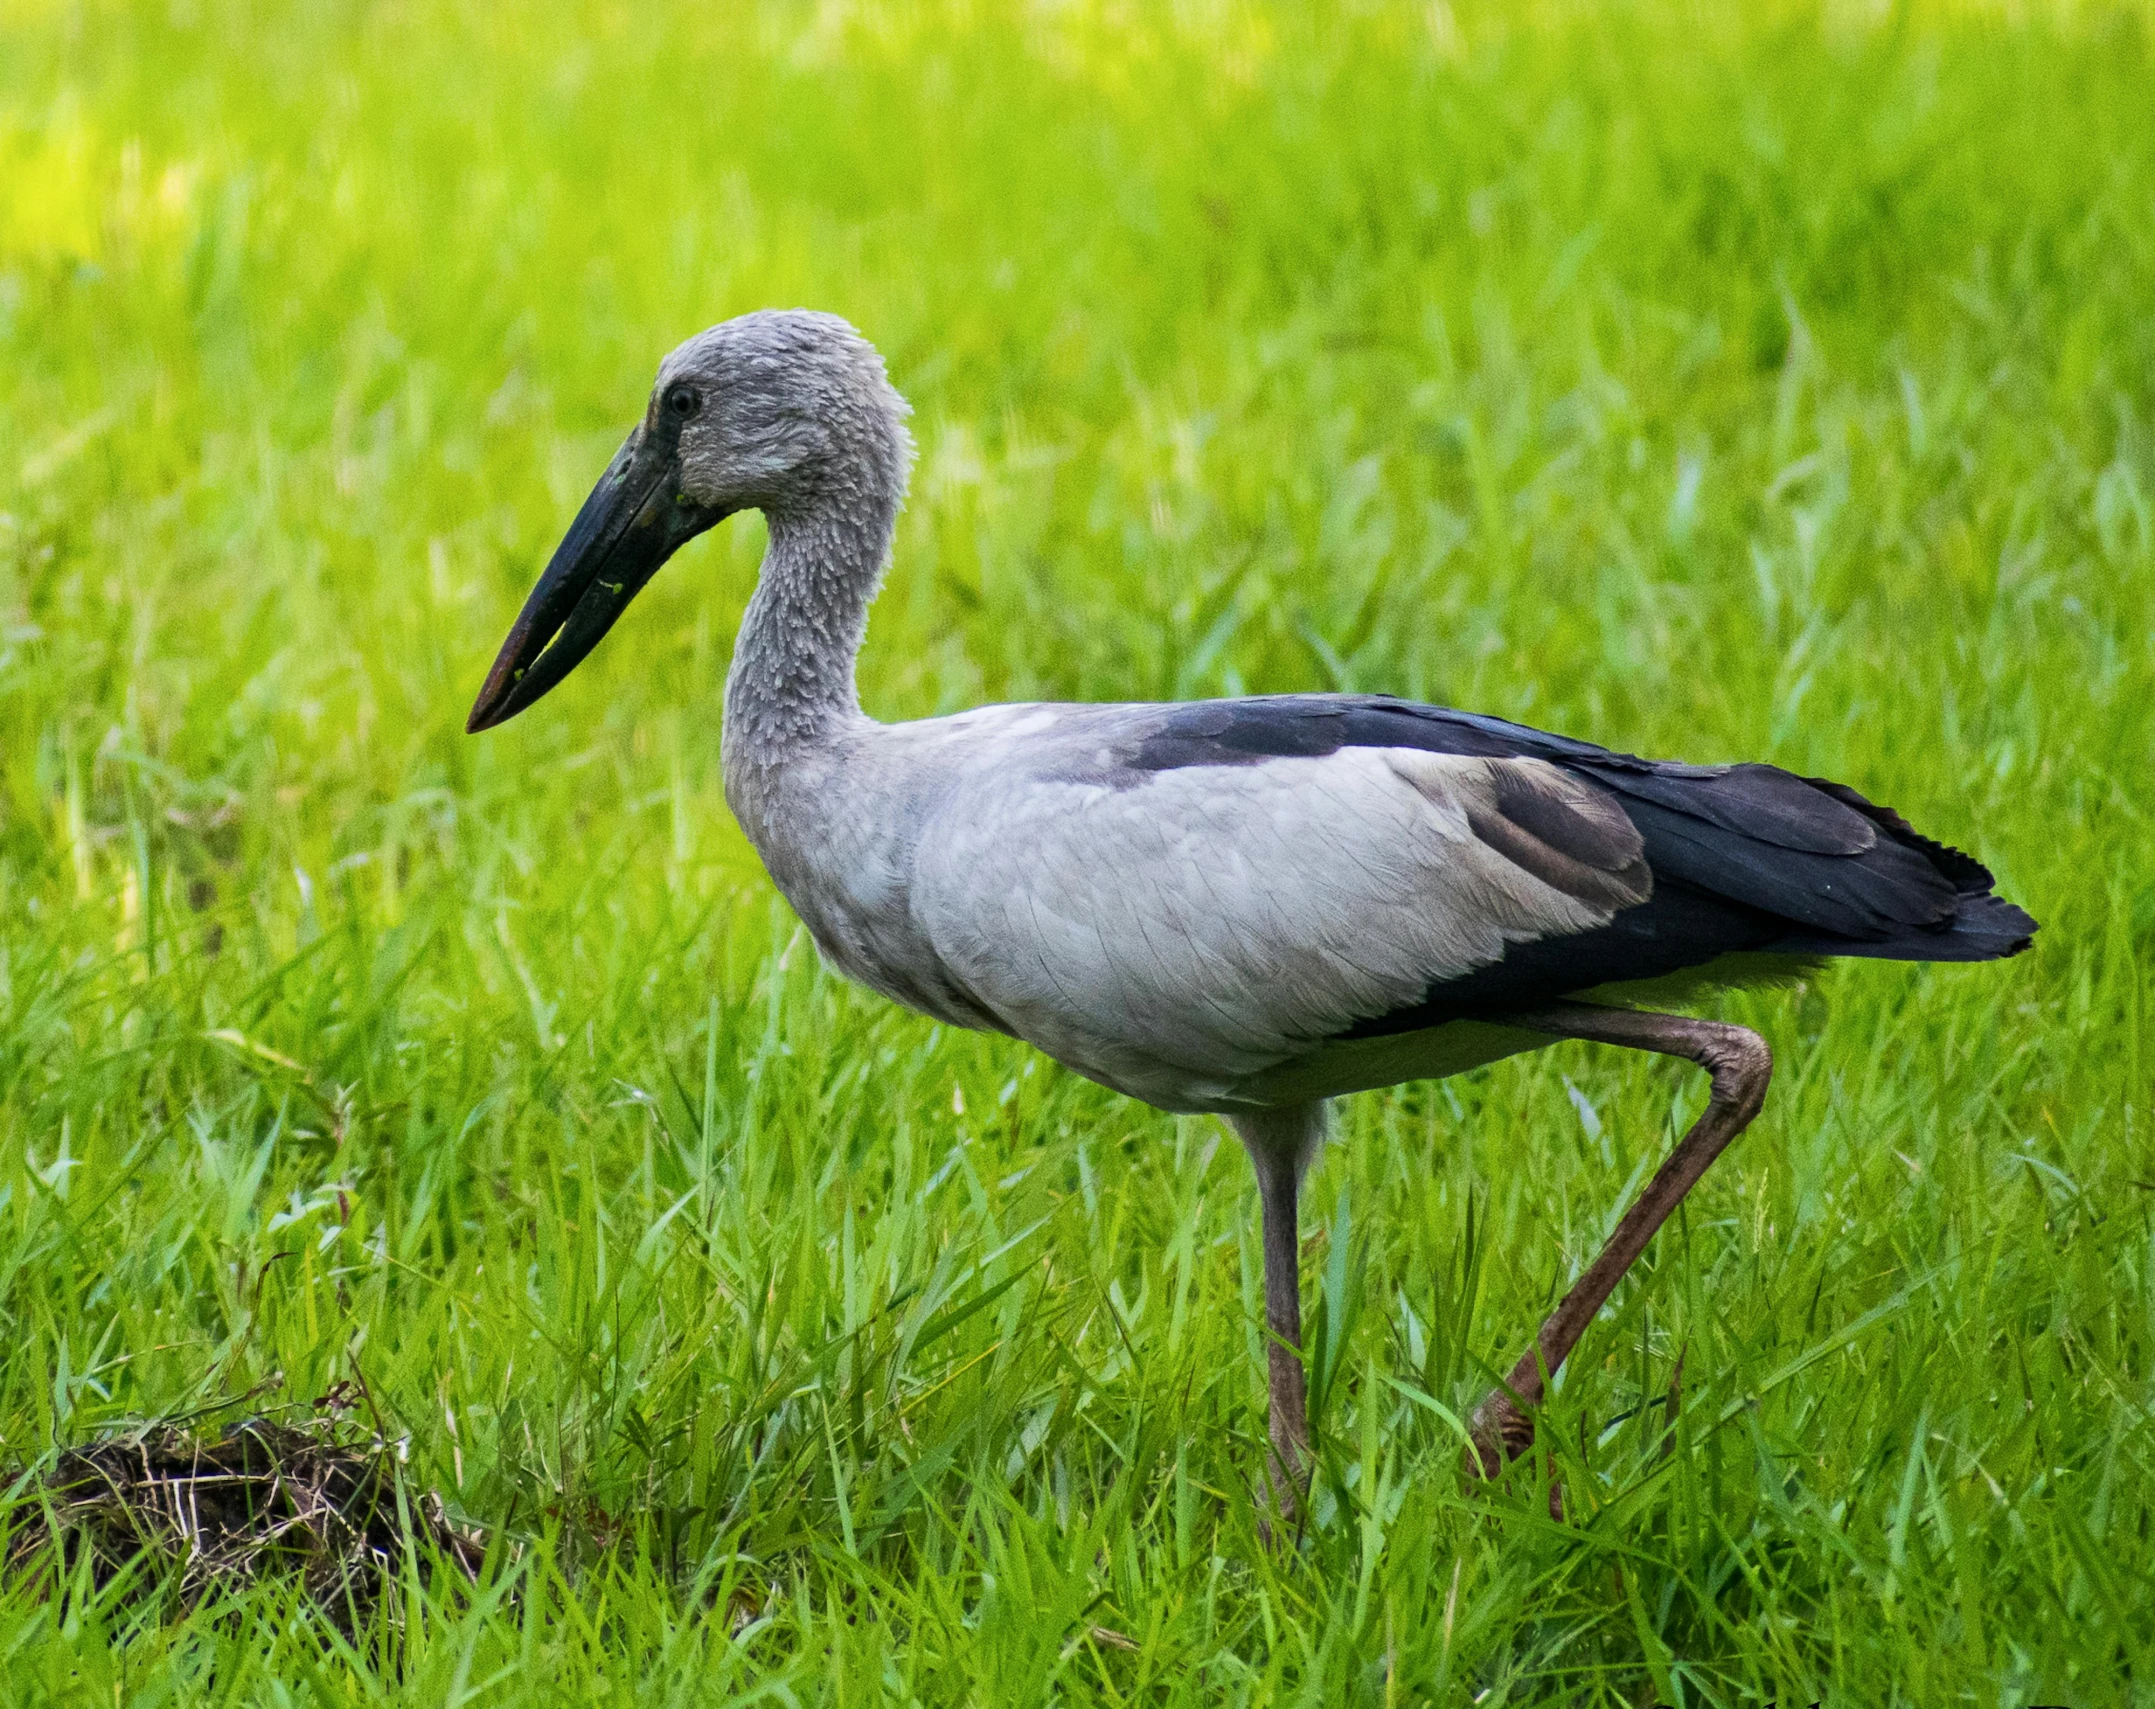 a large bird standing on top of a lush green field, hurufiyya, grey, on ground, museum quality photo, 15081959 21121991 01012000 4k